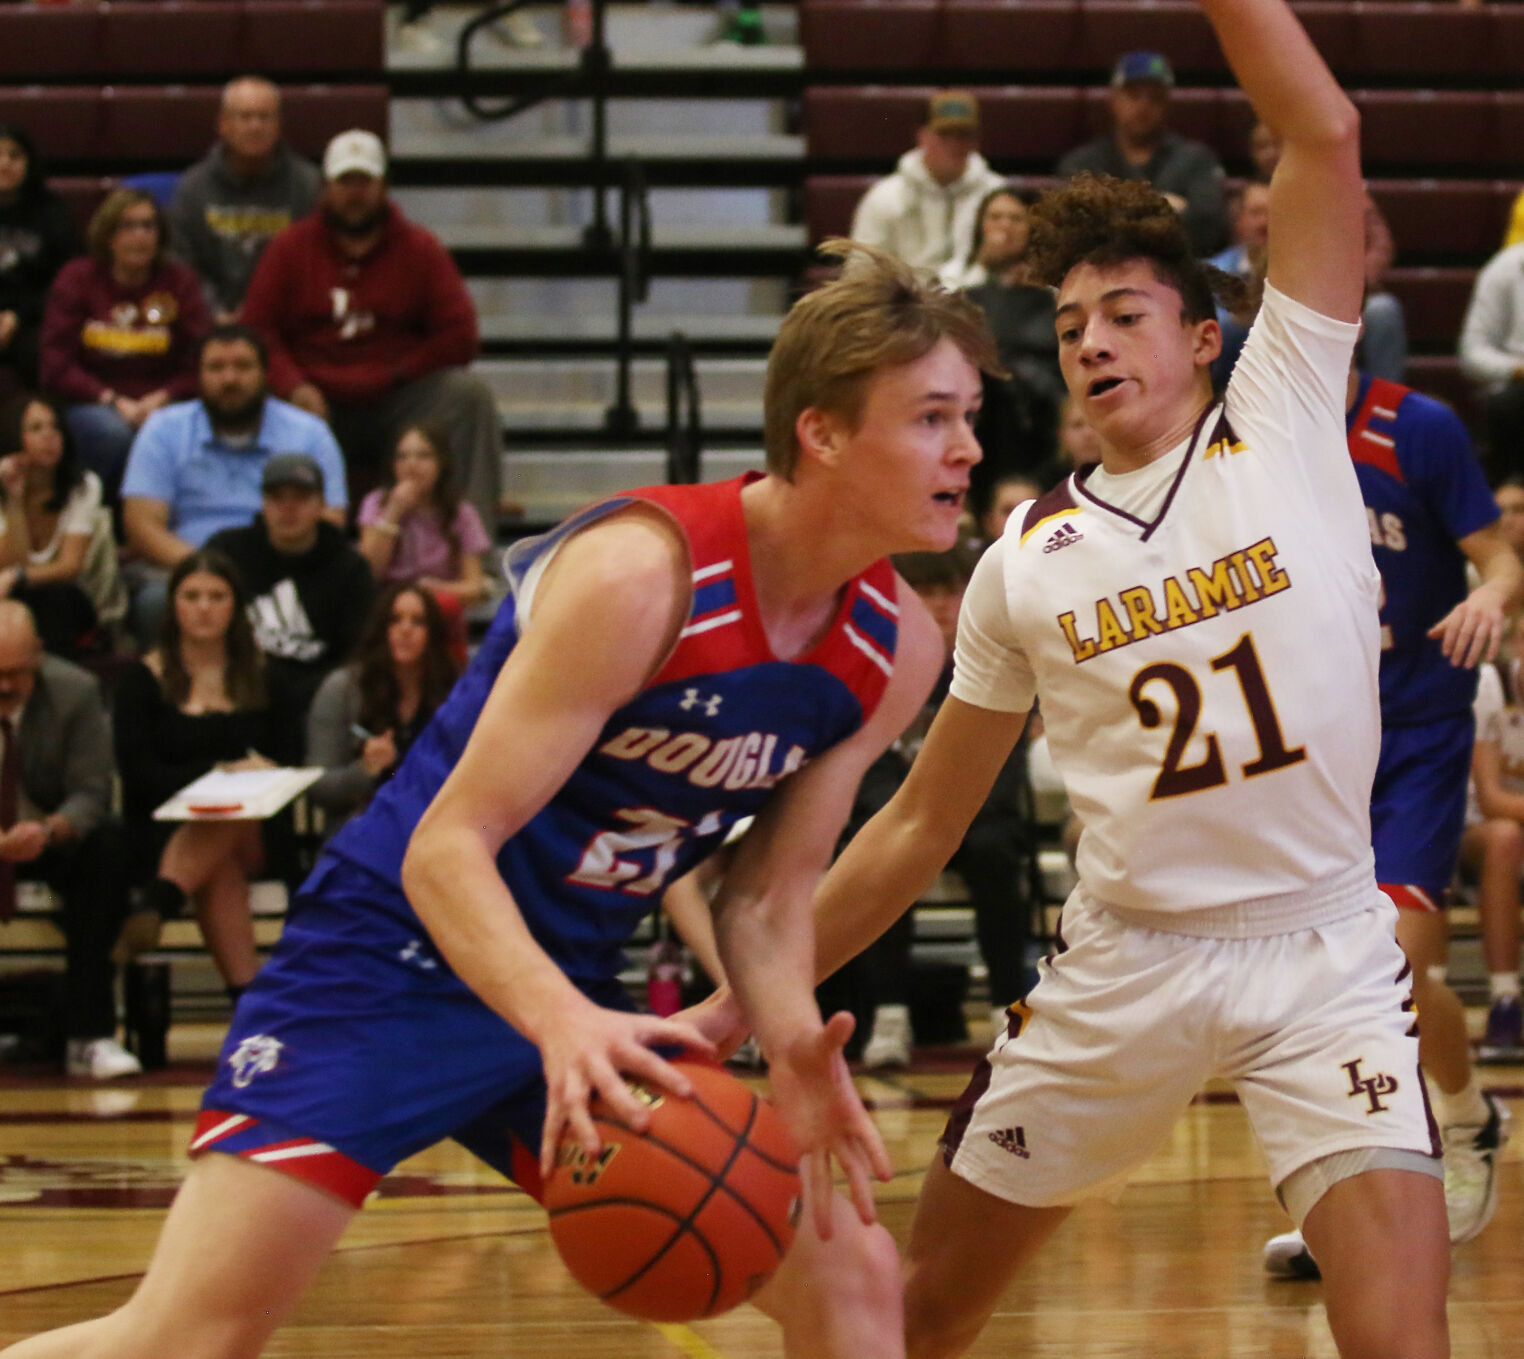 Laramie High Boys Basketball Secures Significant Win in James Johnson Winter Showcase